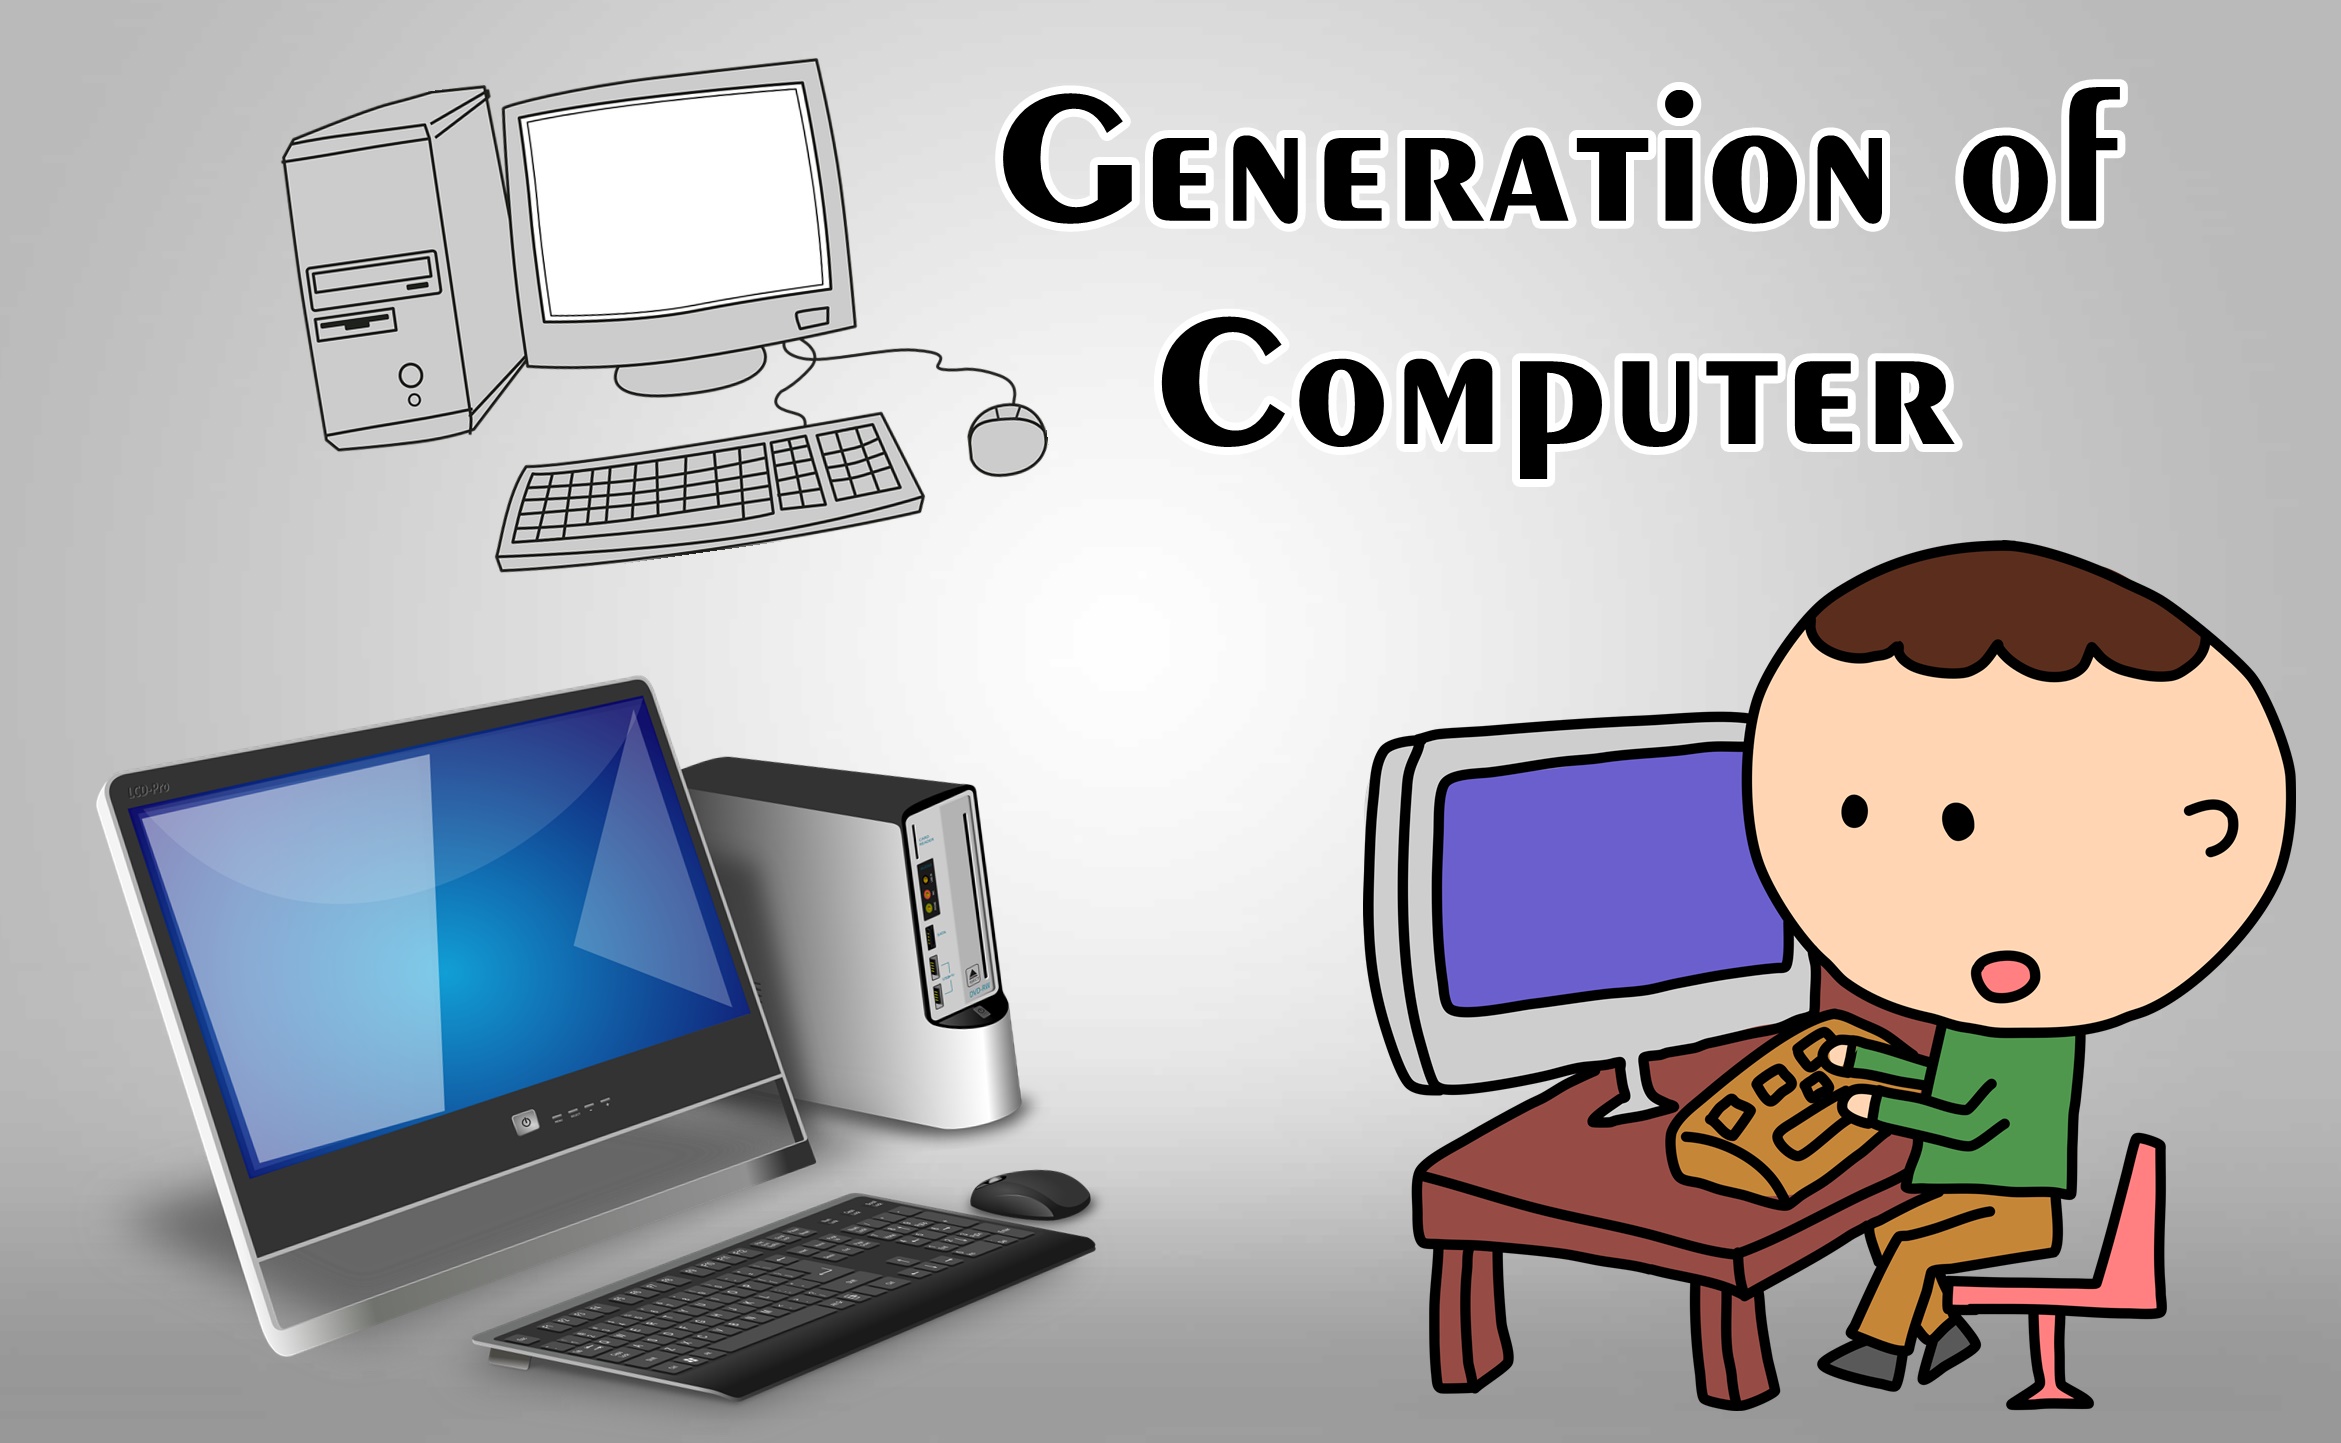 History And Generation Of Computer